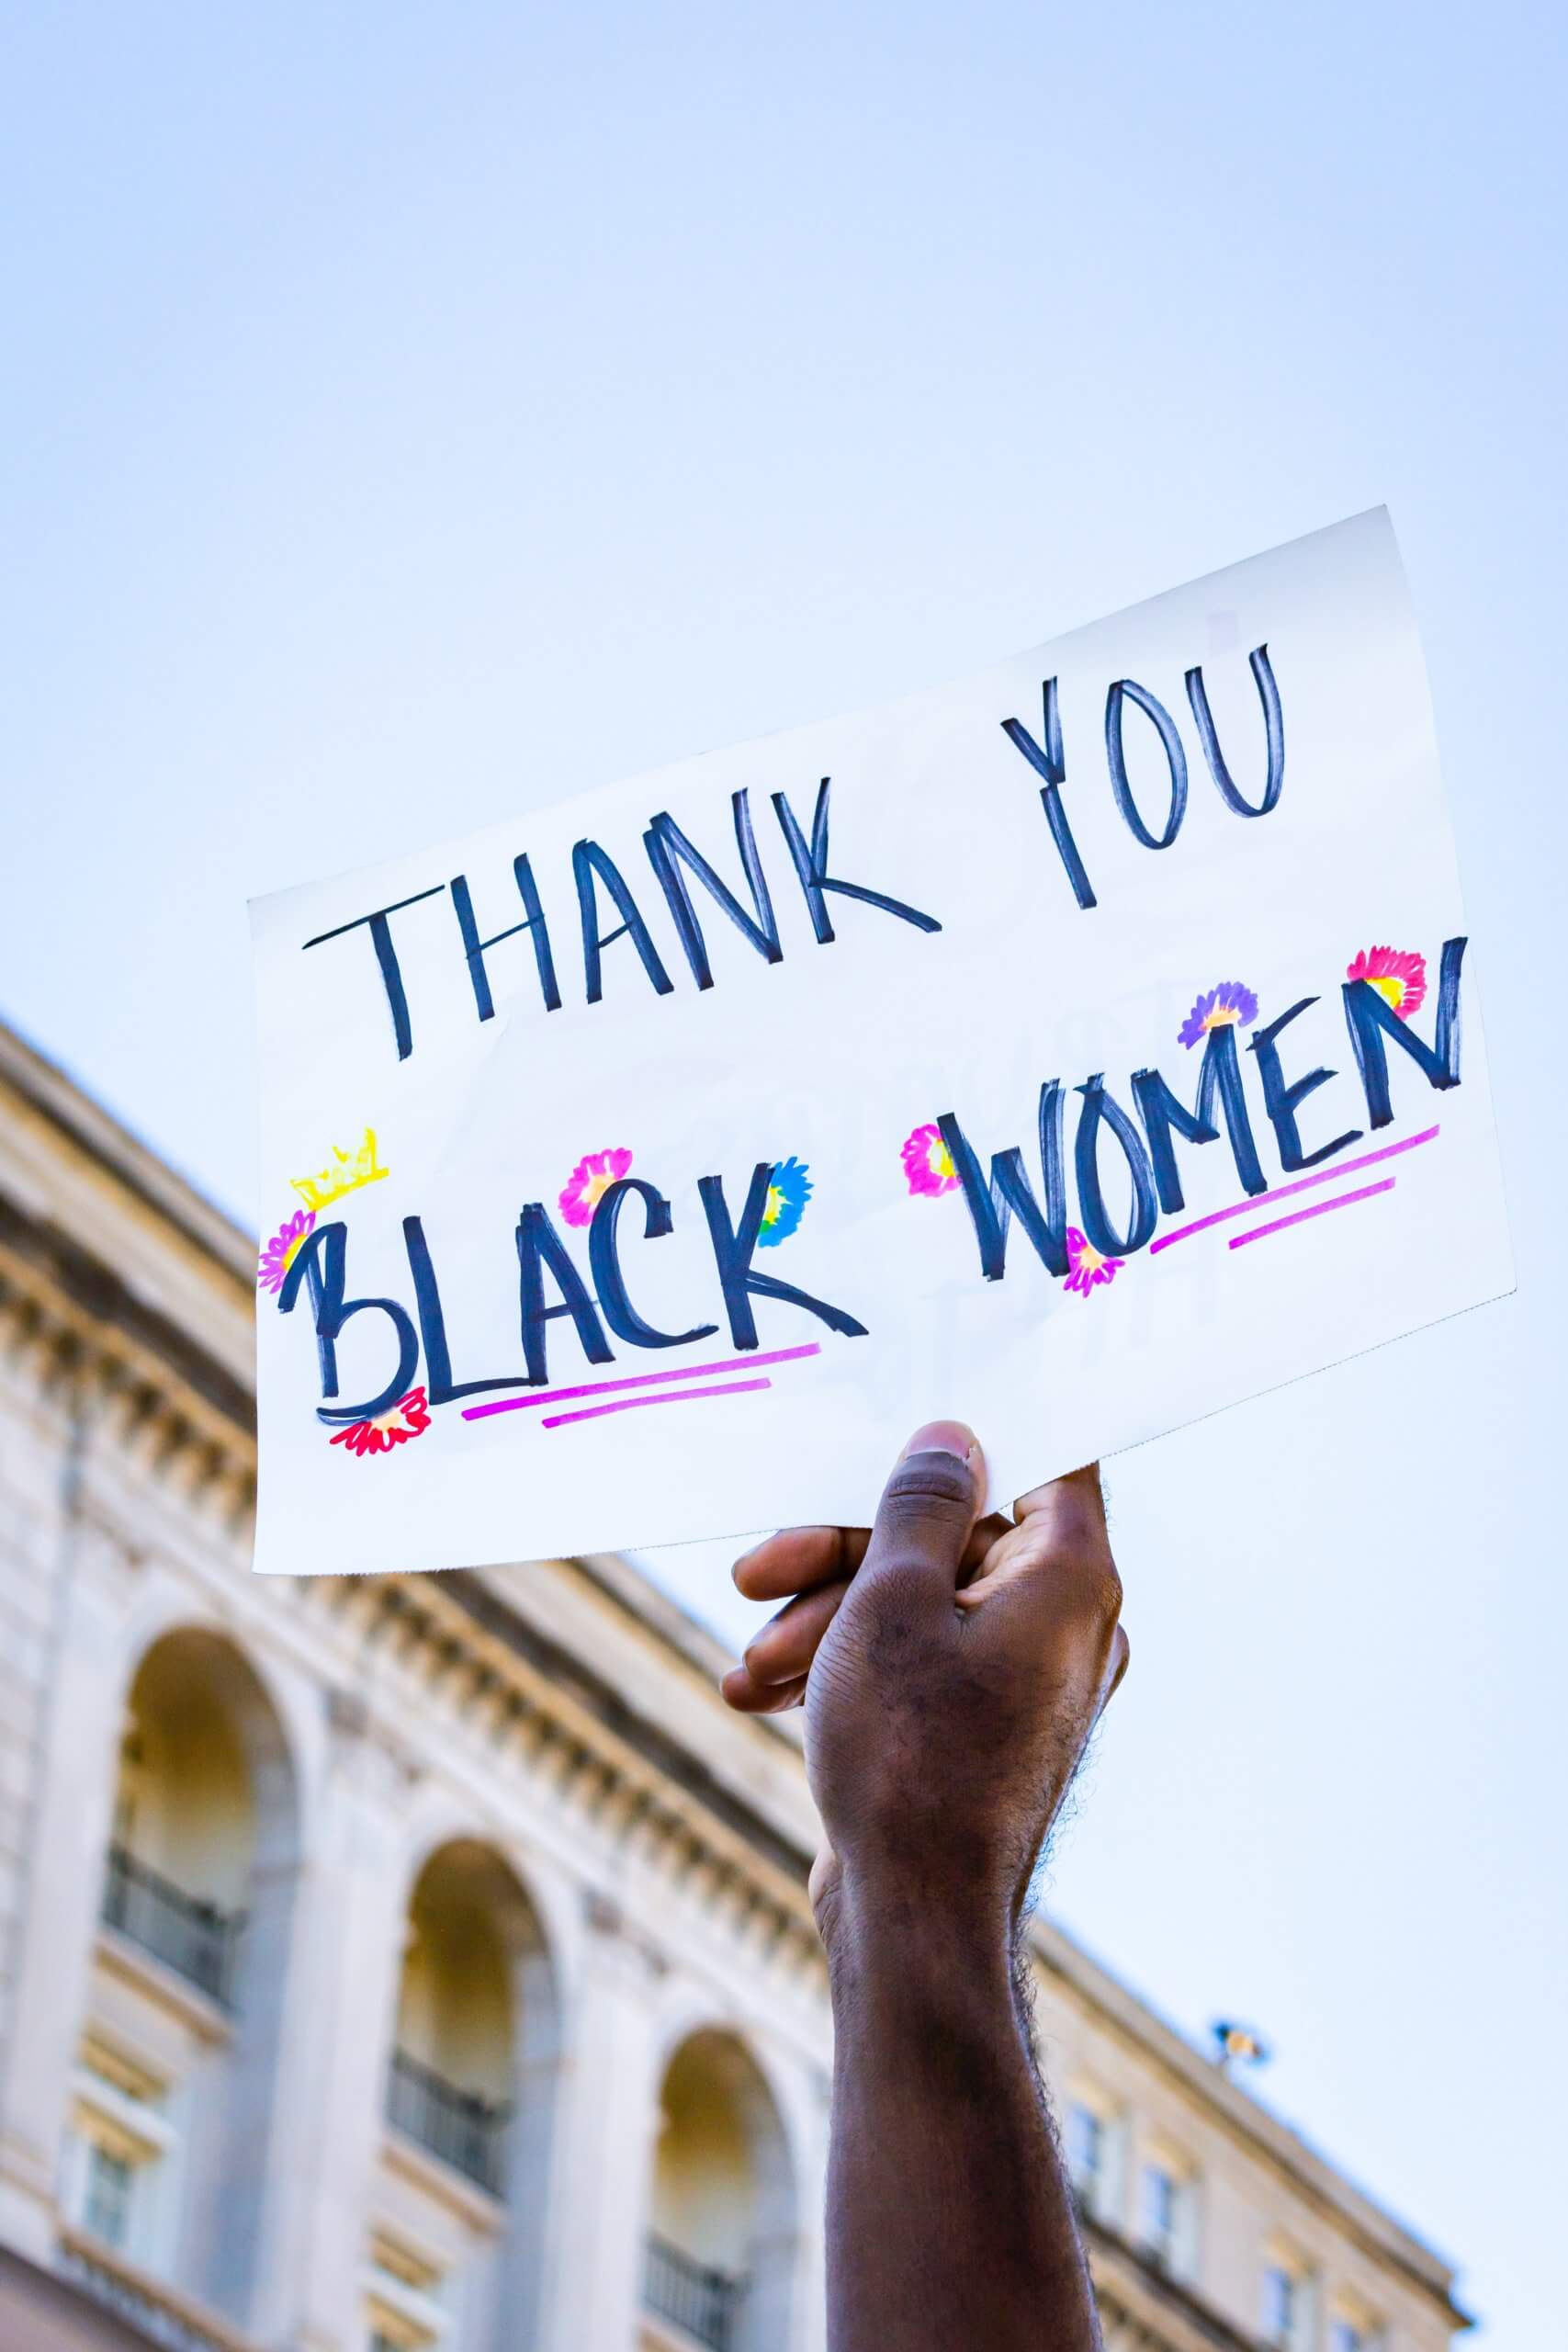 Person holding up hand written sign that says, "Thank You Black Women."